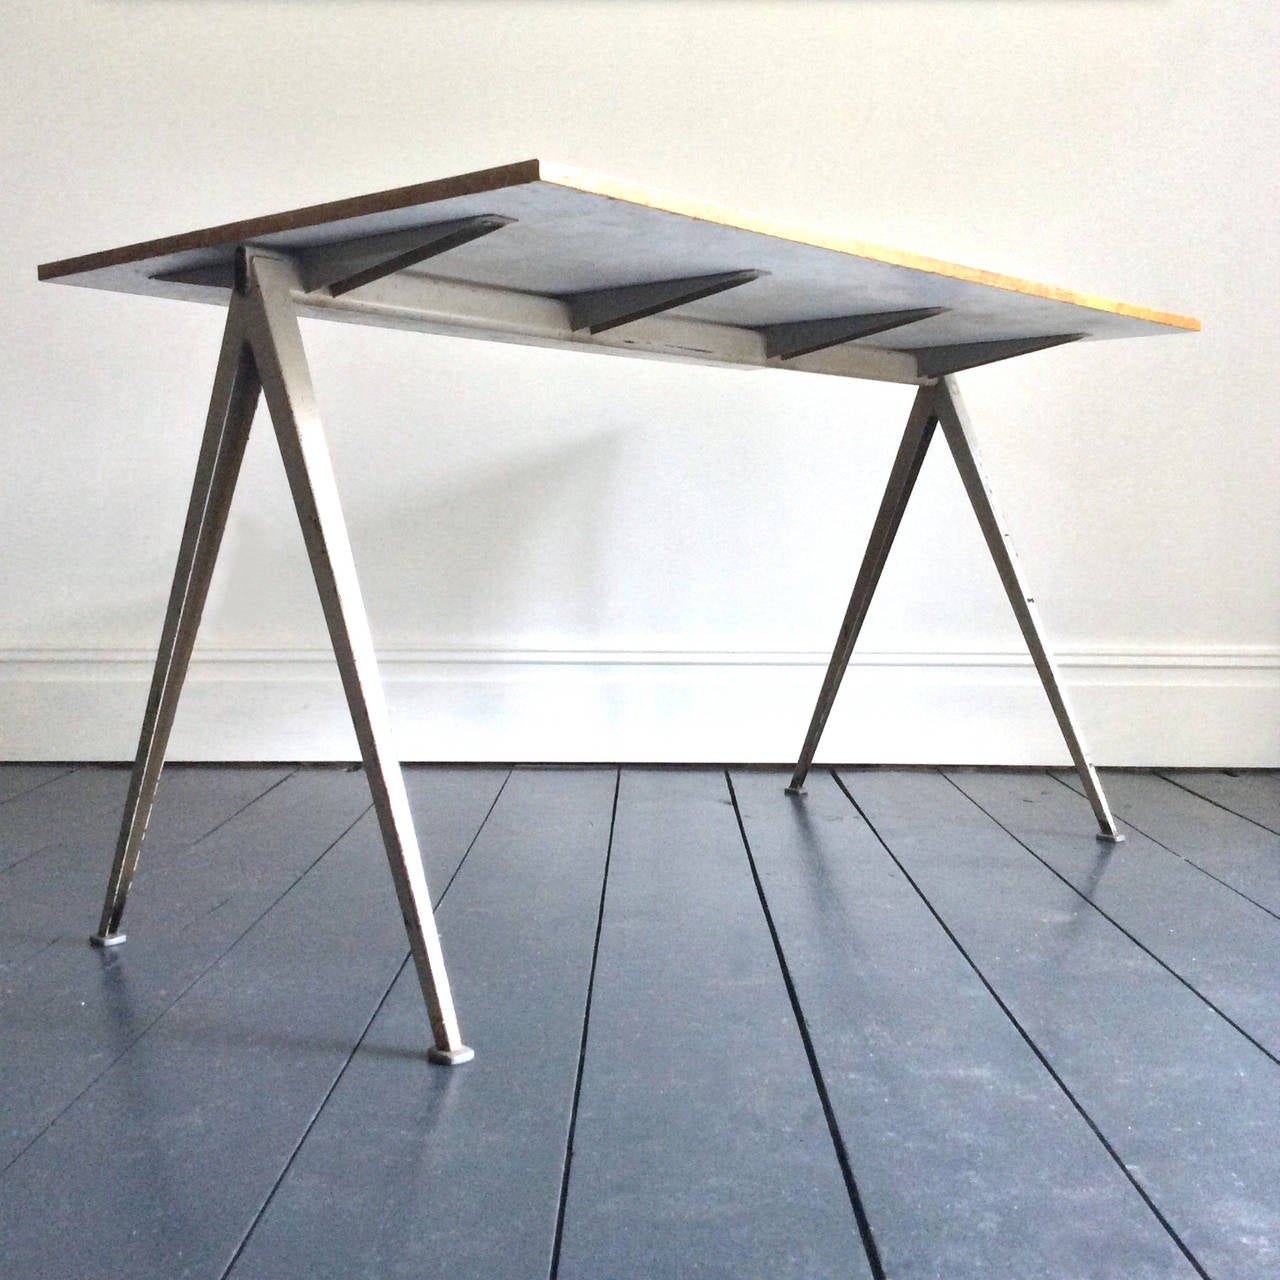 Rare Pyramid table with grey folded metal frame, designed by Wim Rietveld for Ahrend de Cirkel.  The design of the table - inspired by the Compass table of Jean Prouvé - received the Signe d'Or award in 1960.

This piece has wear to the frame in